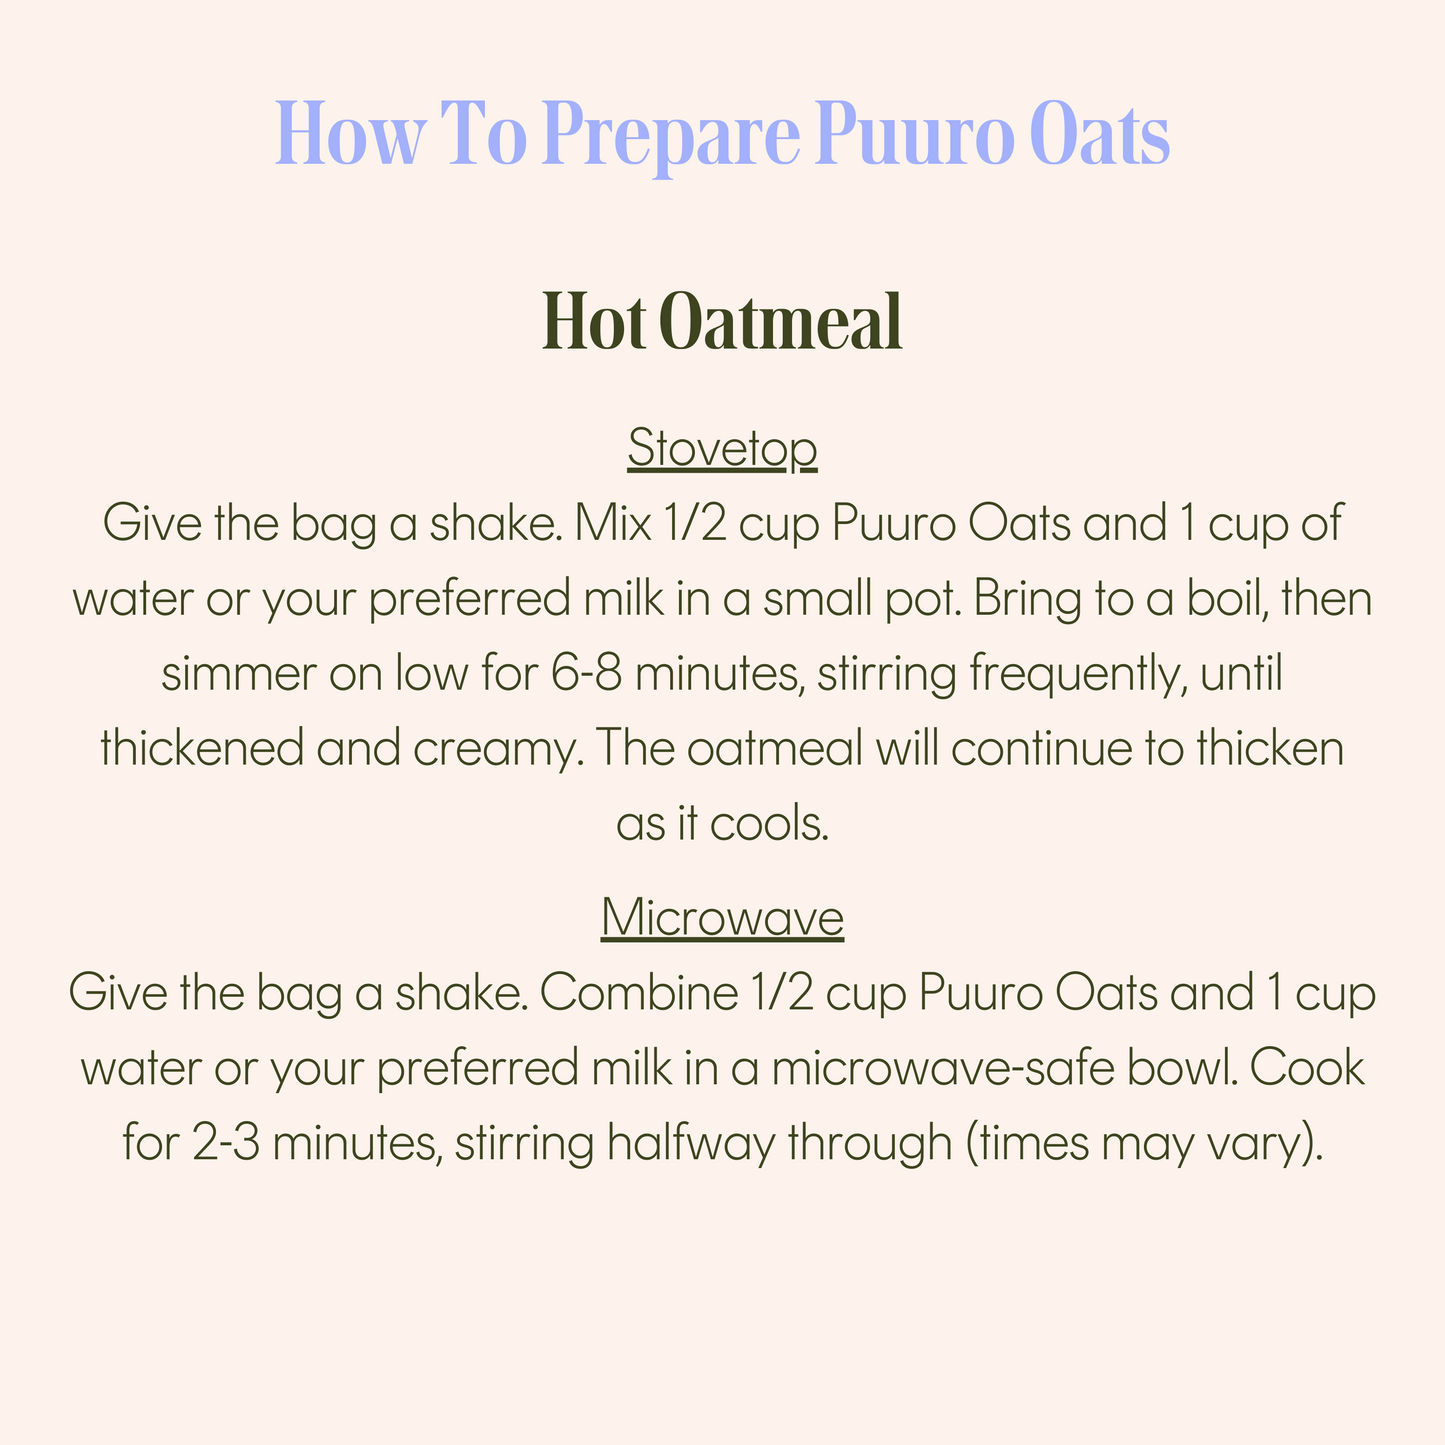 Instructions on how to prepare Puuro Oats as hot oatmeal